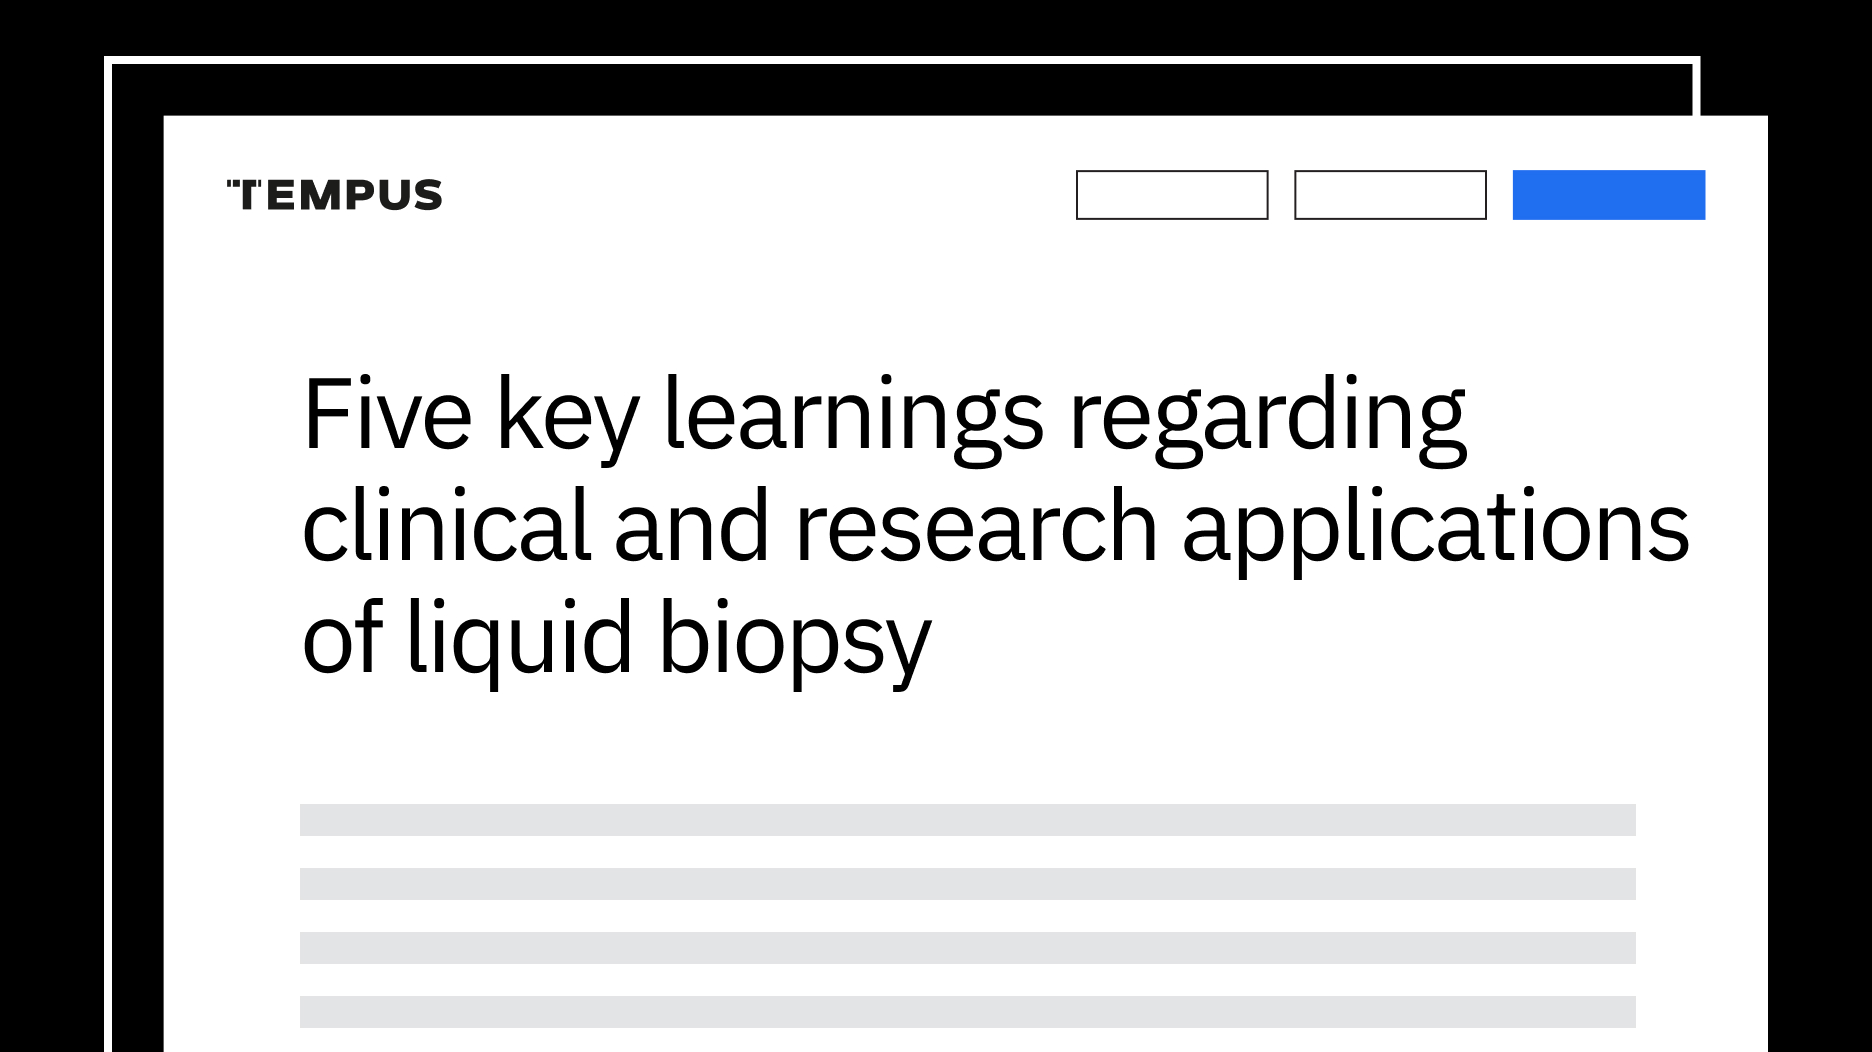 Five key learnings regarding clinical and research applications of liquid biopsy